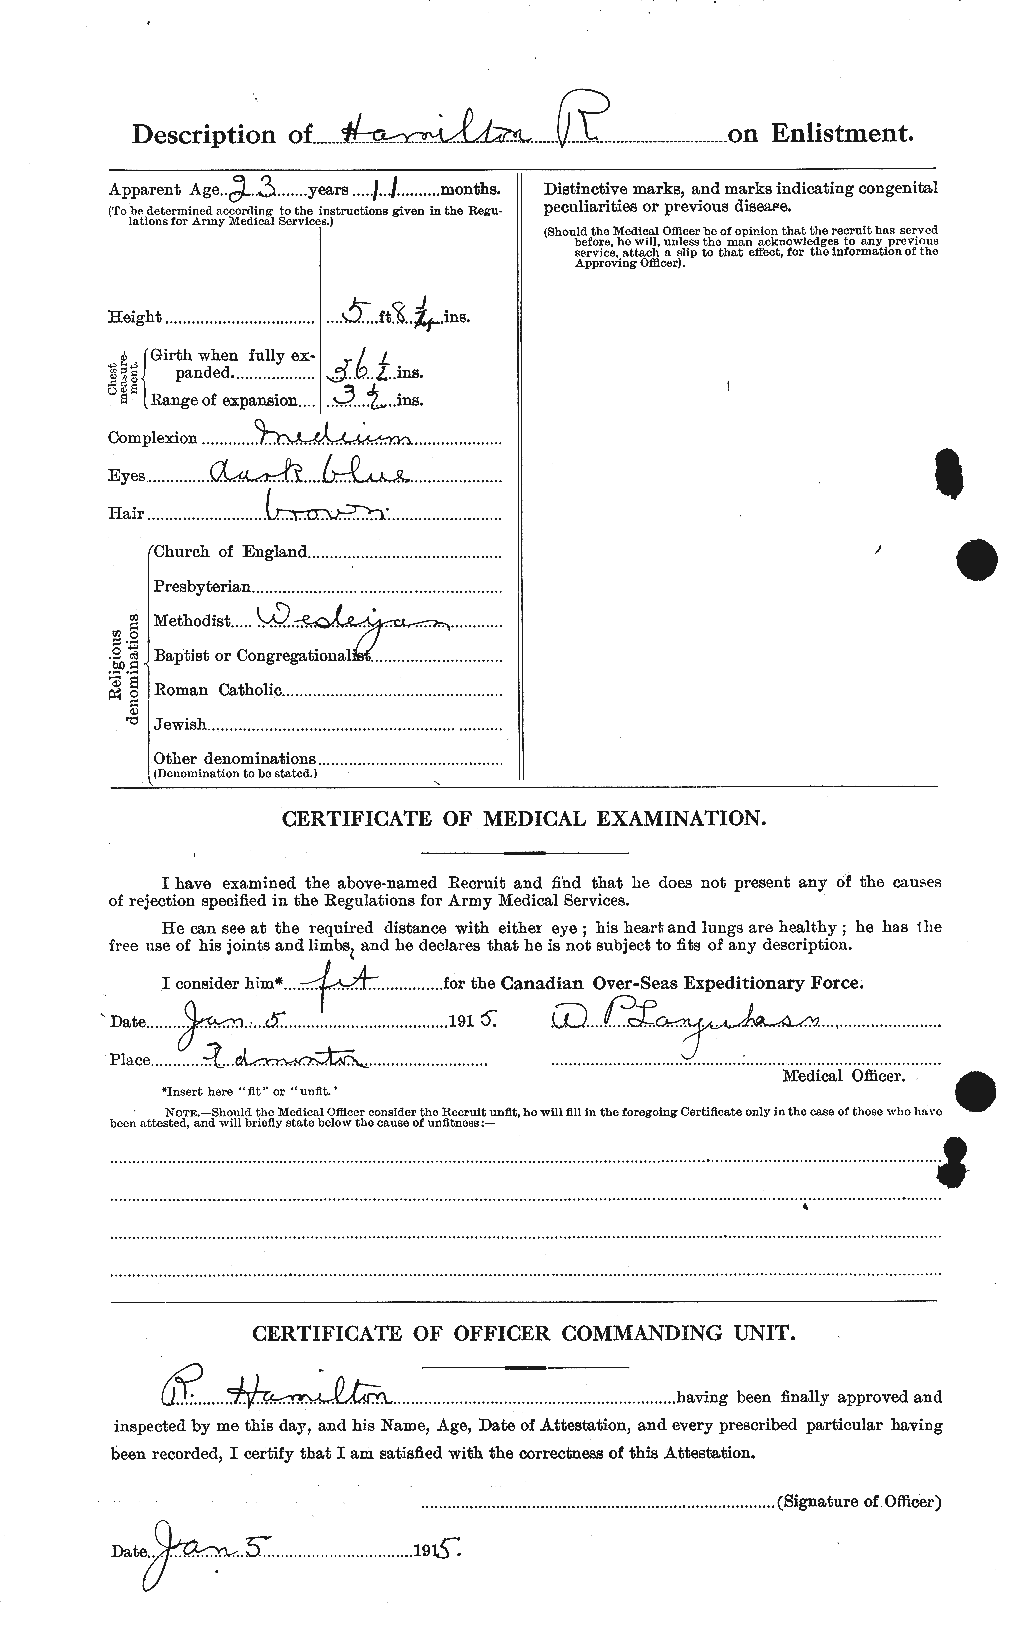 Personnel Records of the First World War - CEF 373294b